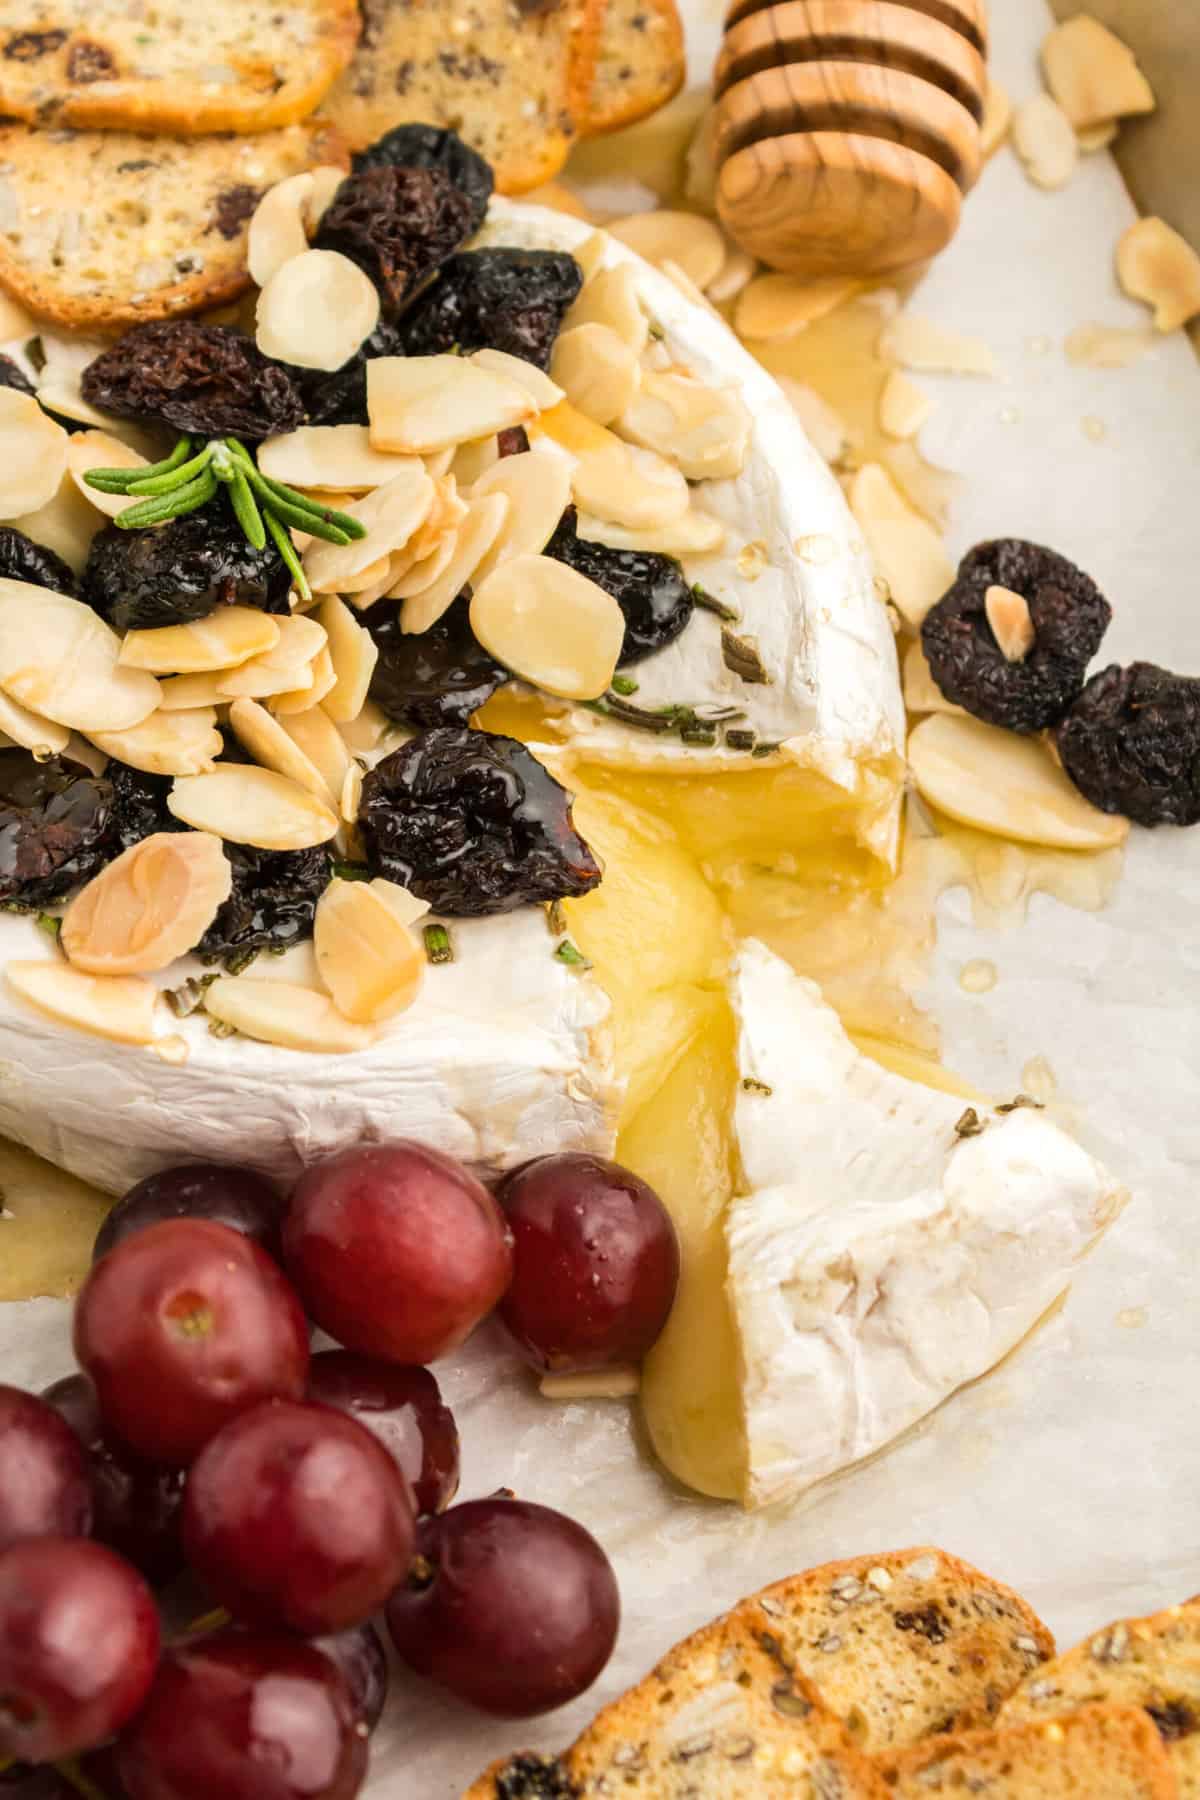 How to Bake Brie (With Delicious Toppings)